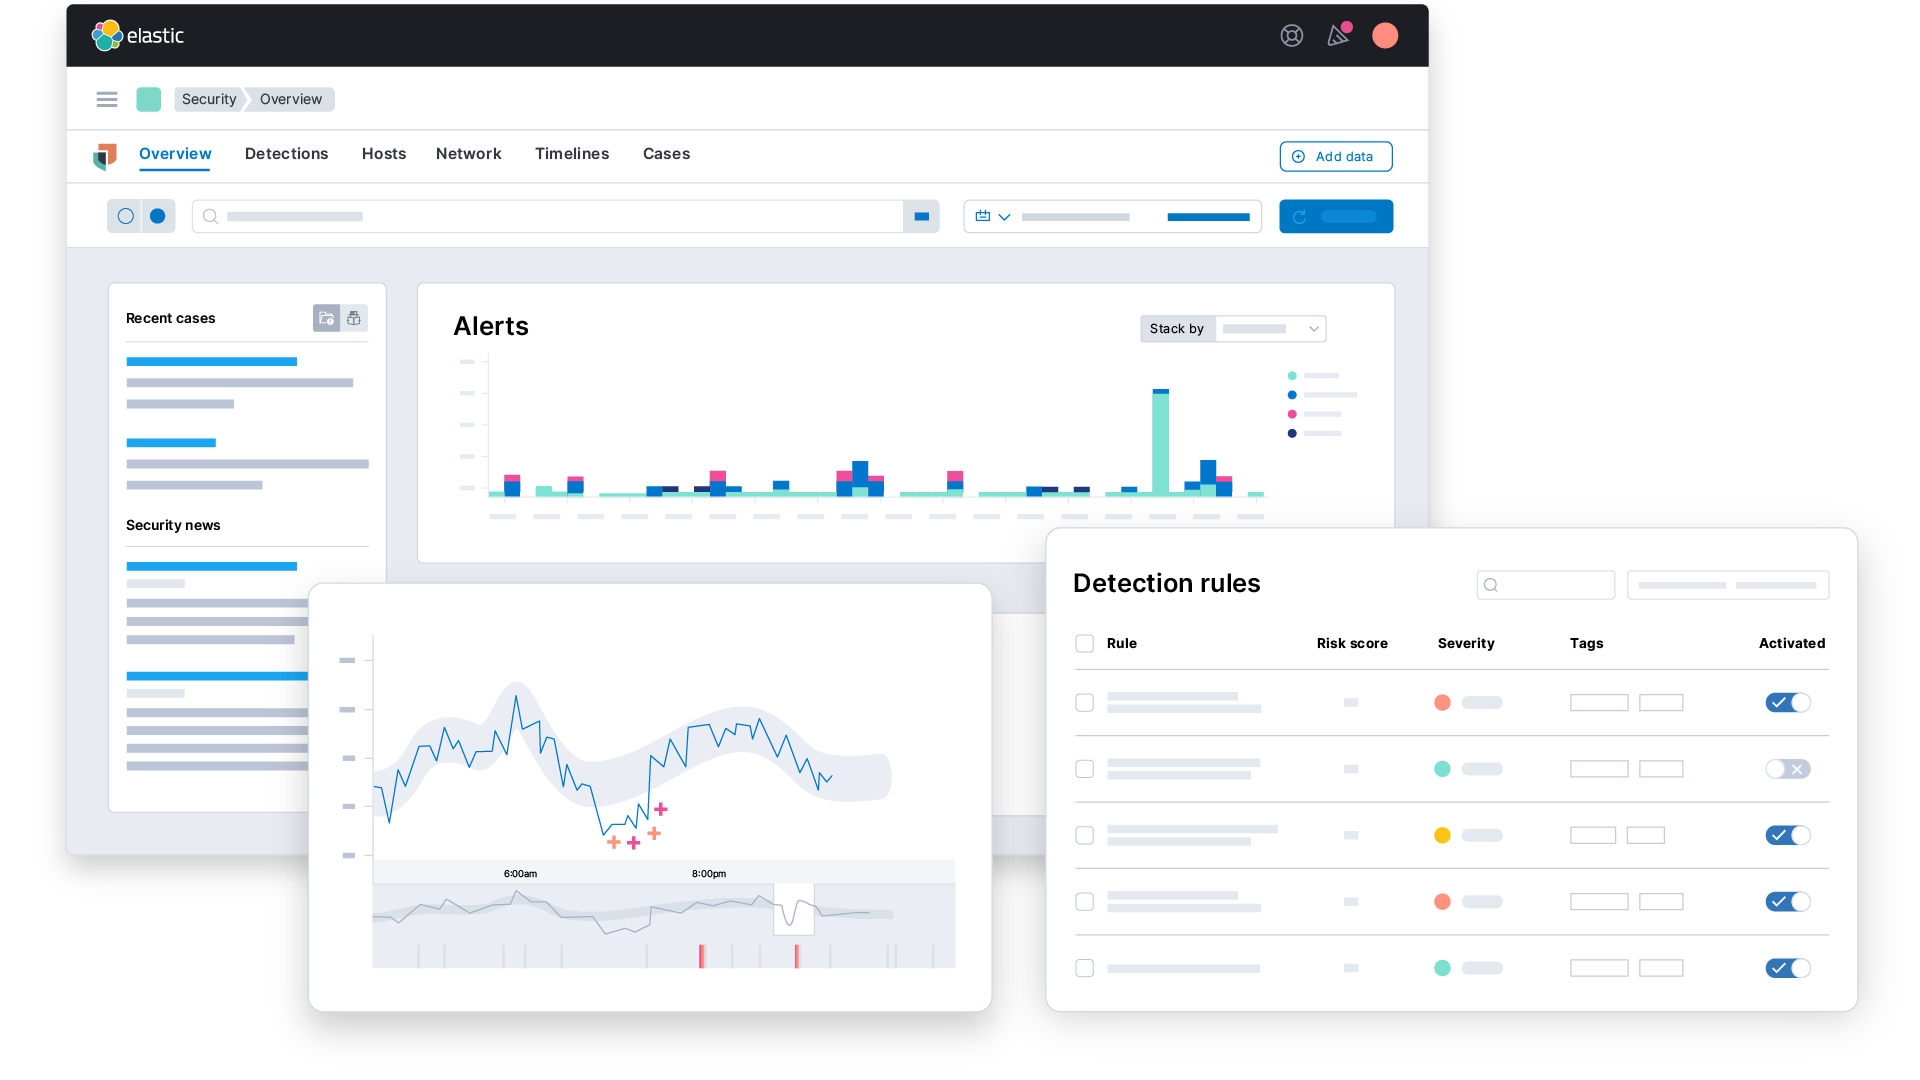 Elastic Security for SIEM, with SOC dashboard, ML findings, and detection rules